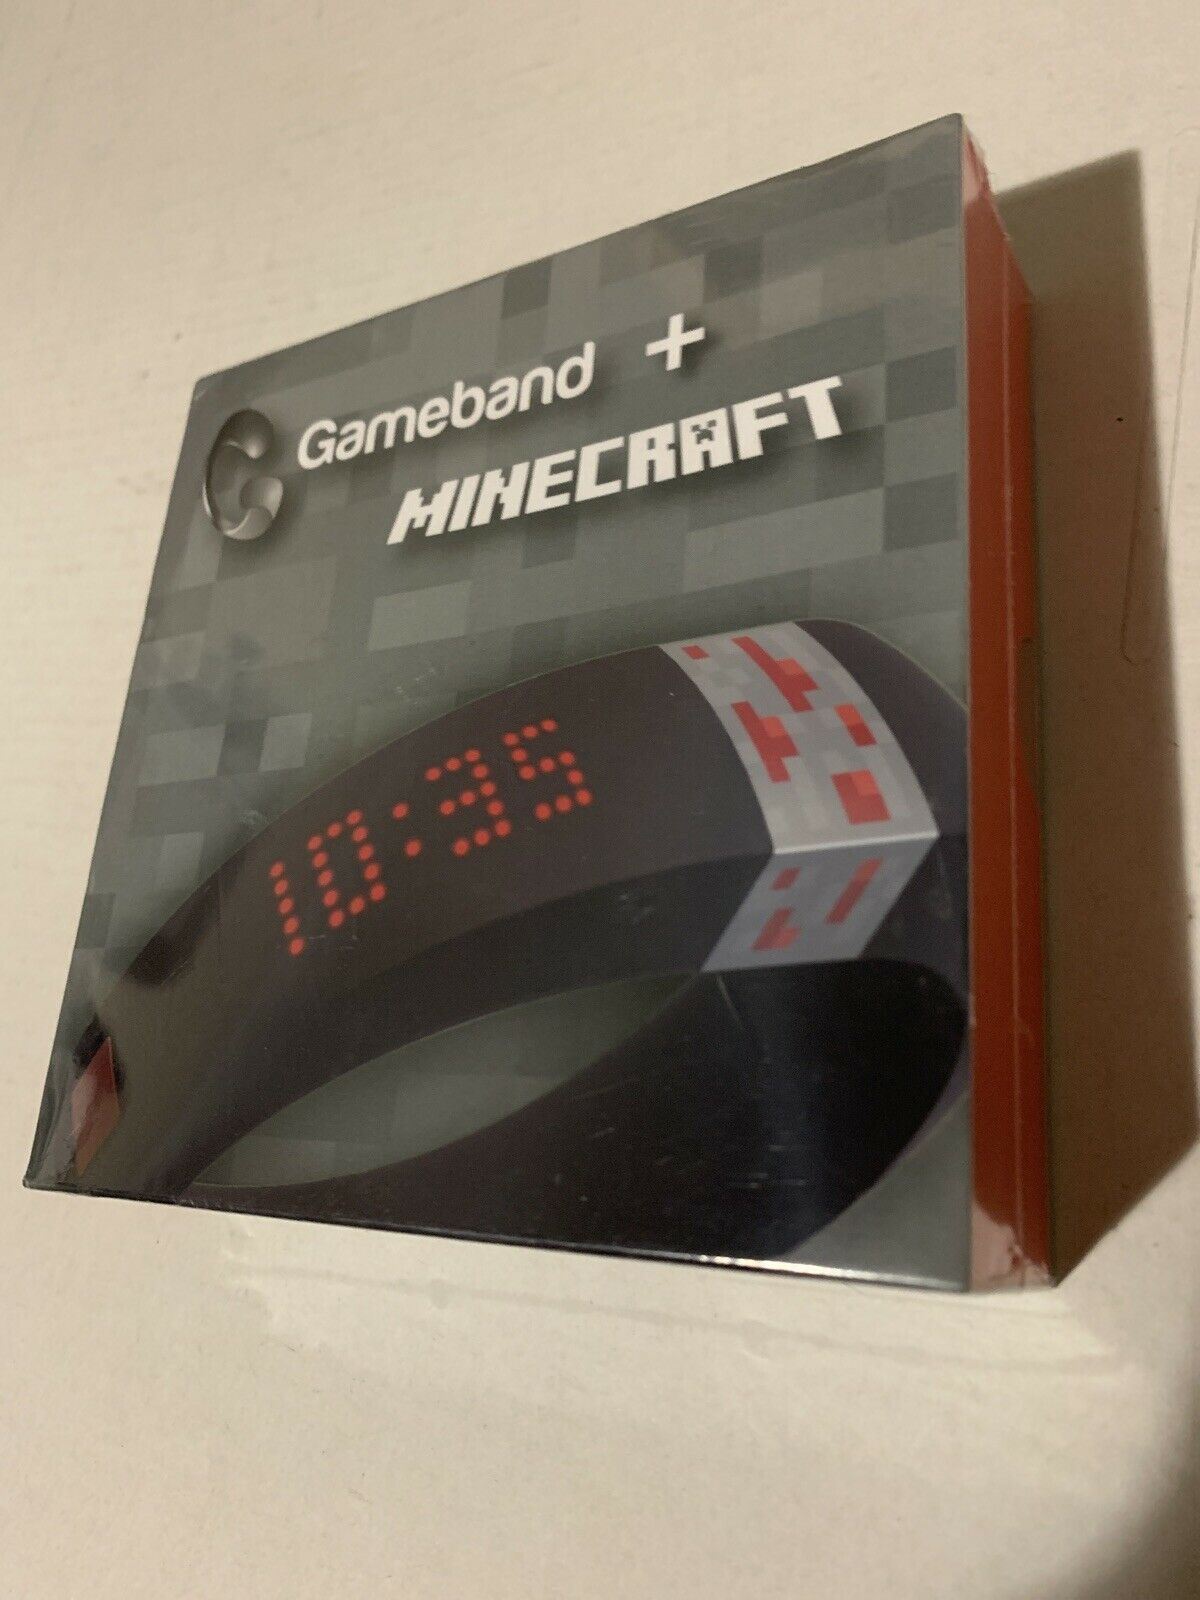 *New Sealed* Gameband + Minecraft - Small Size. Play Minecraft Anywhere